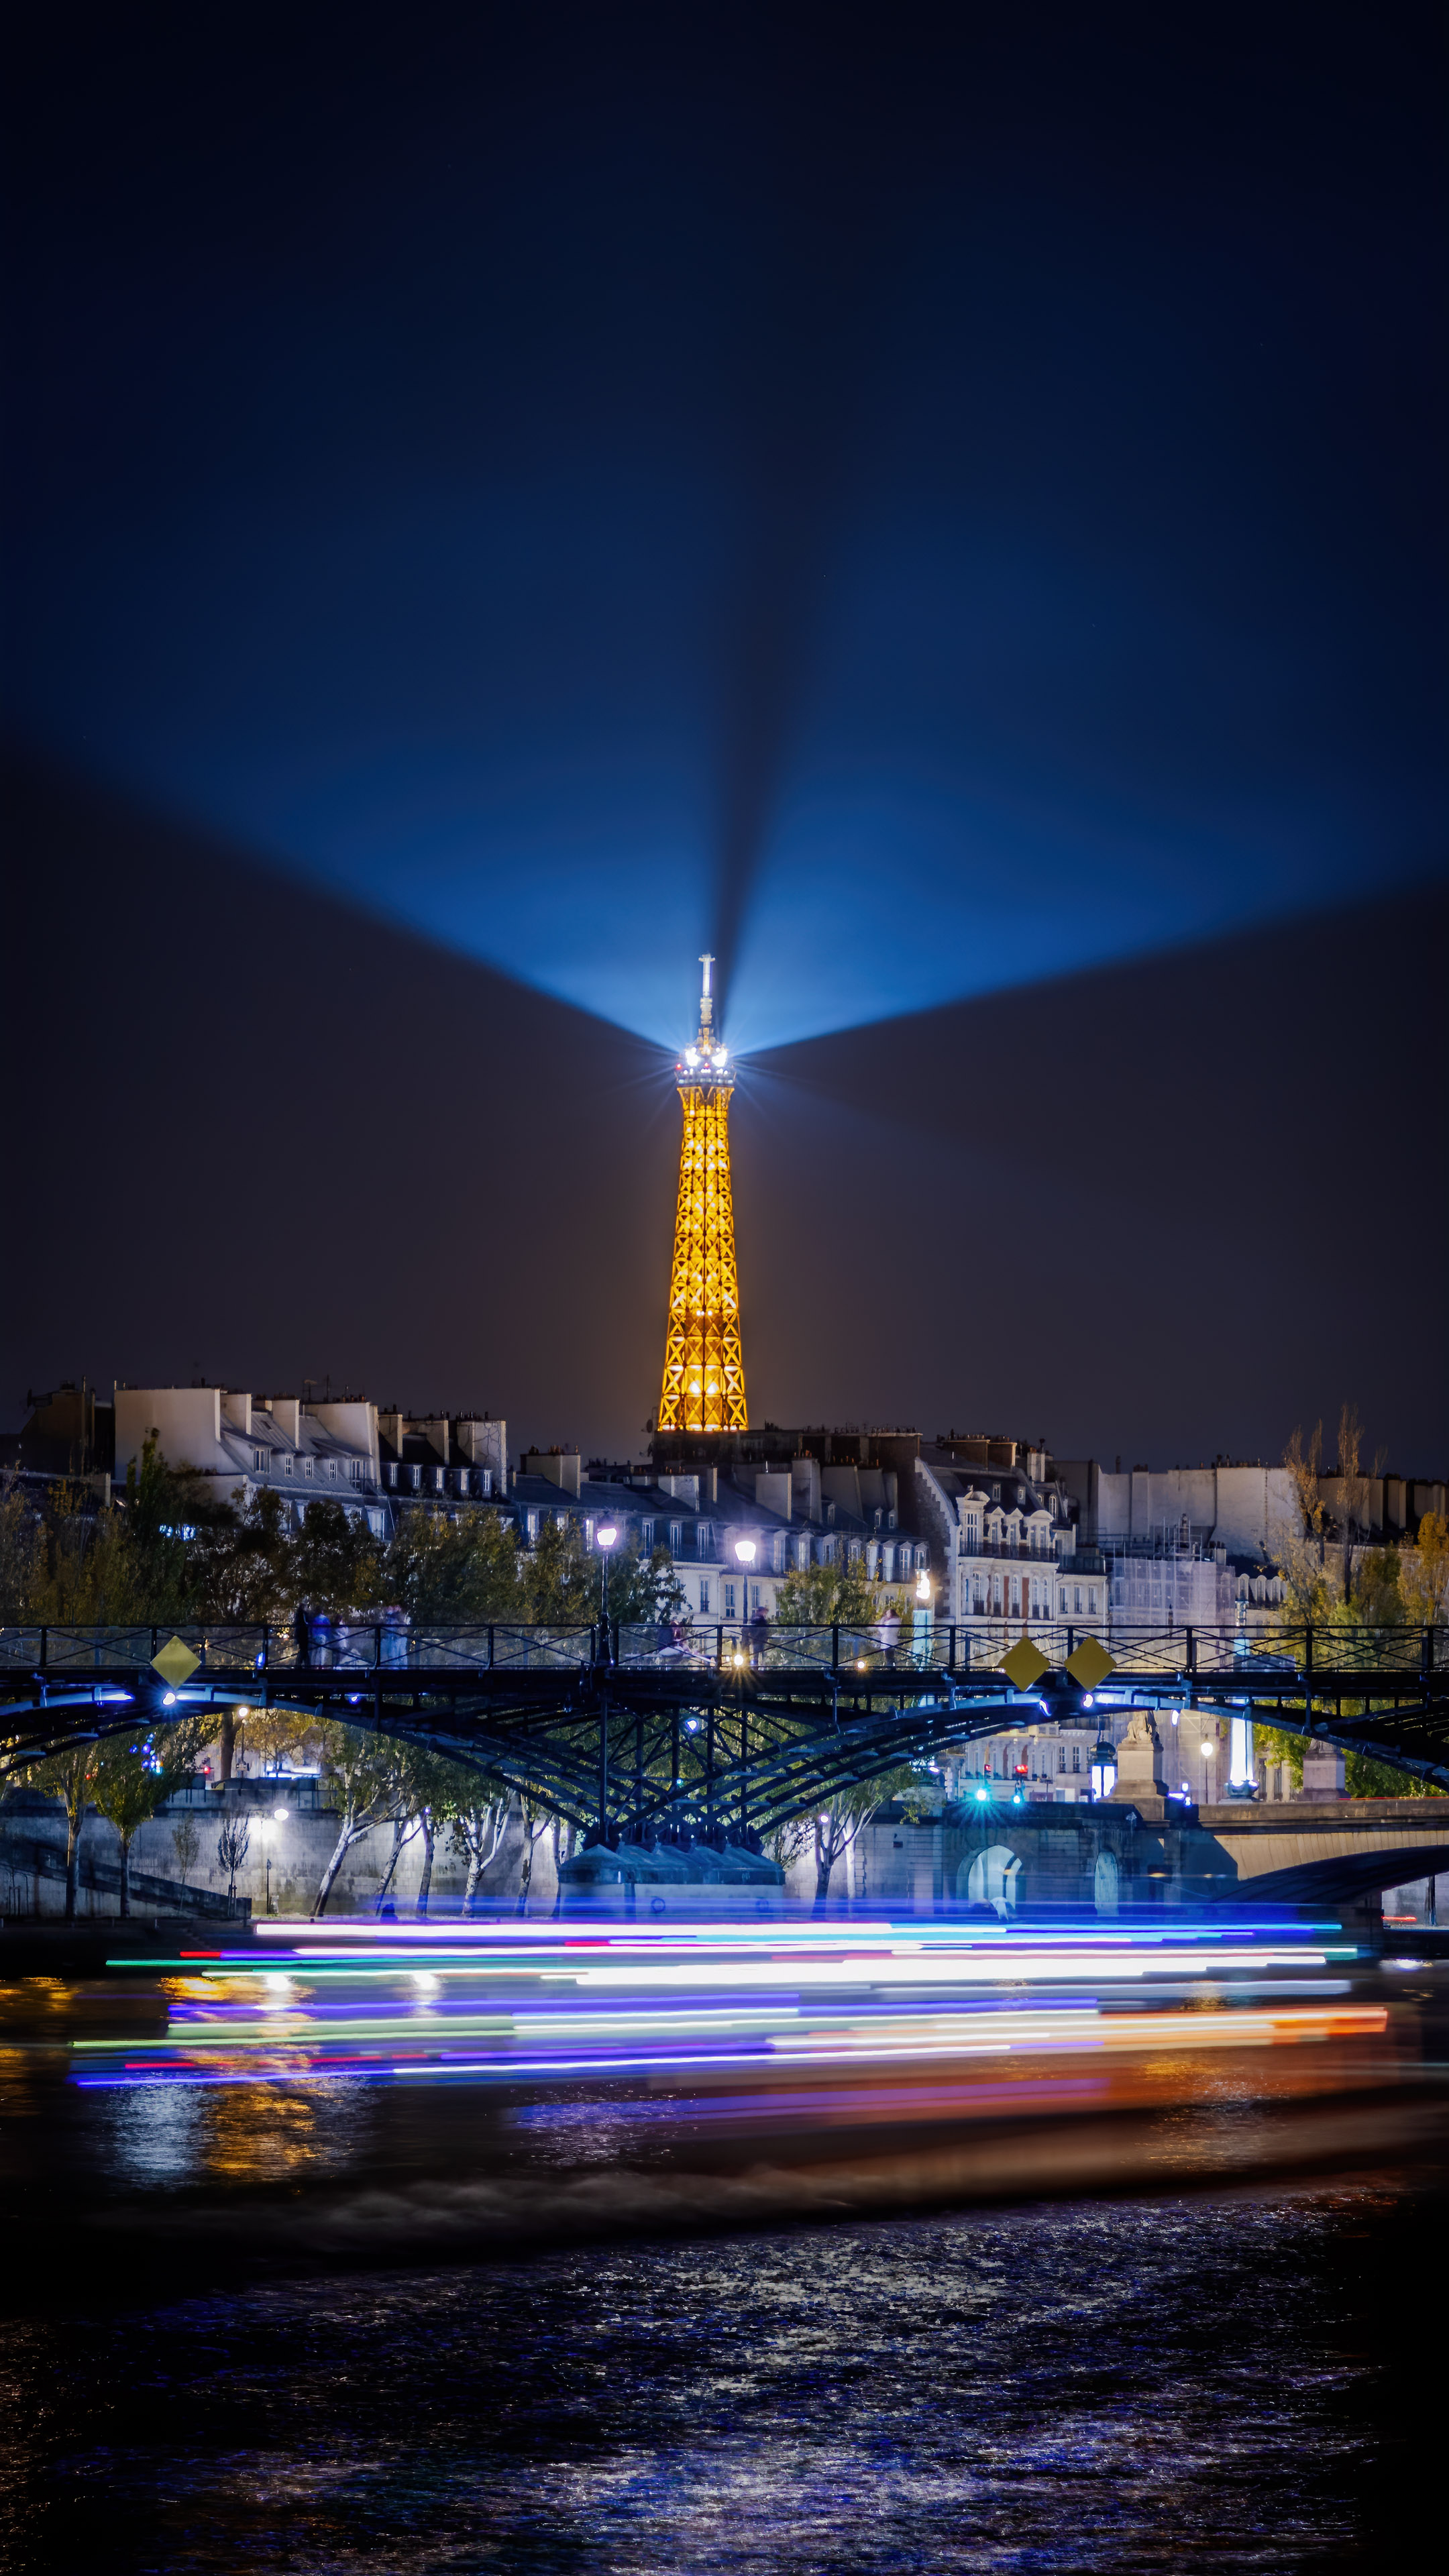 Get lost in the stunning Parisian cityscape and Eiffel Tower with our high-quality night city wallpaper. Perfect for iPhone and mobile devices.